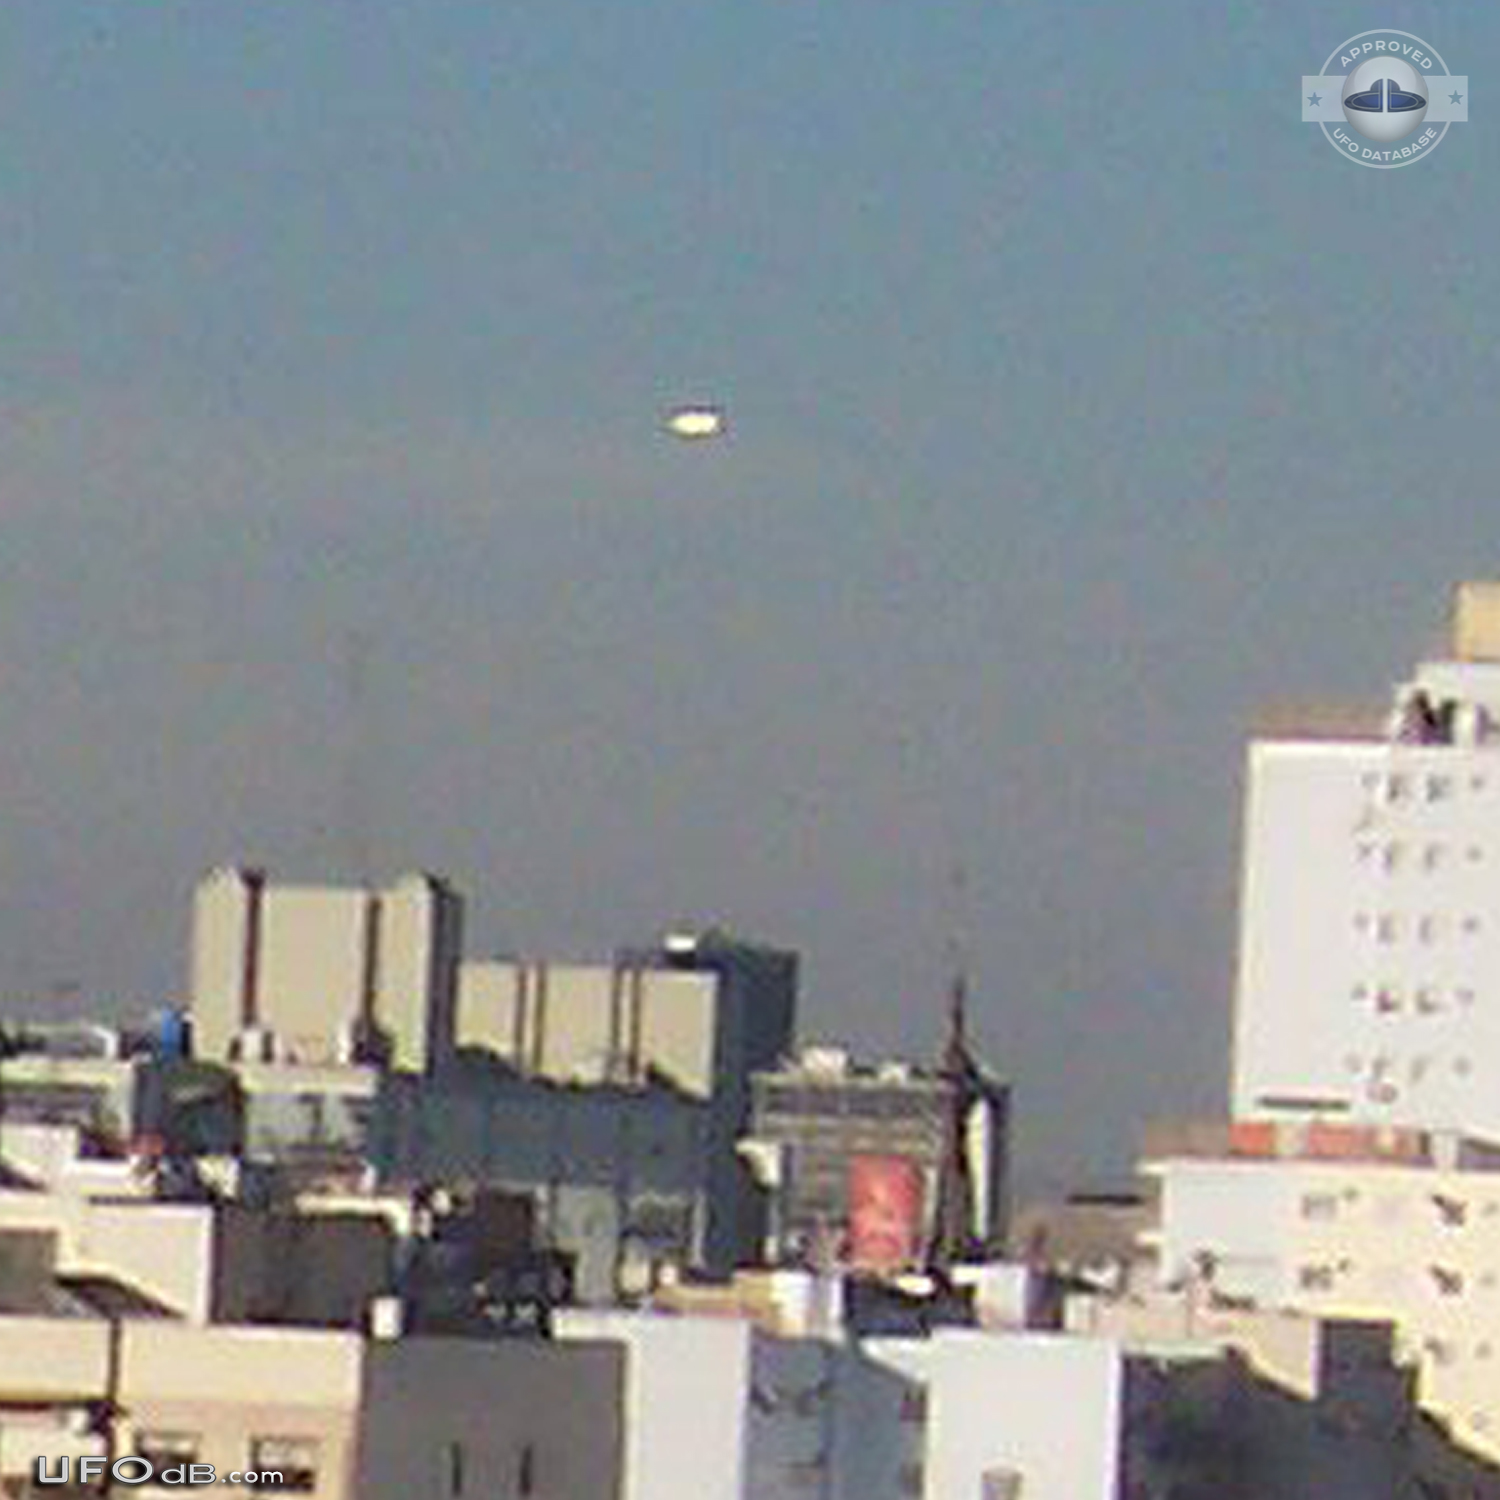 Friends Picture reveals UFO over Buenos Aires in Argentina May 2009 UFO Picture #607-4